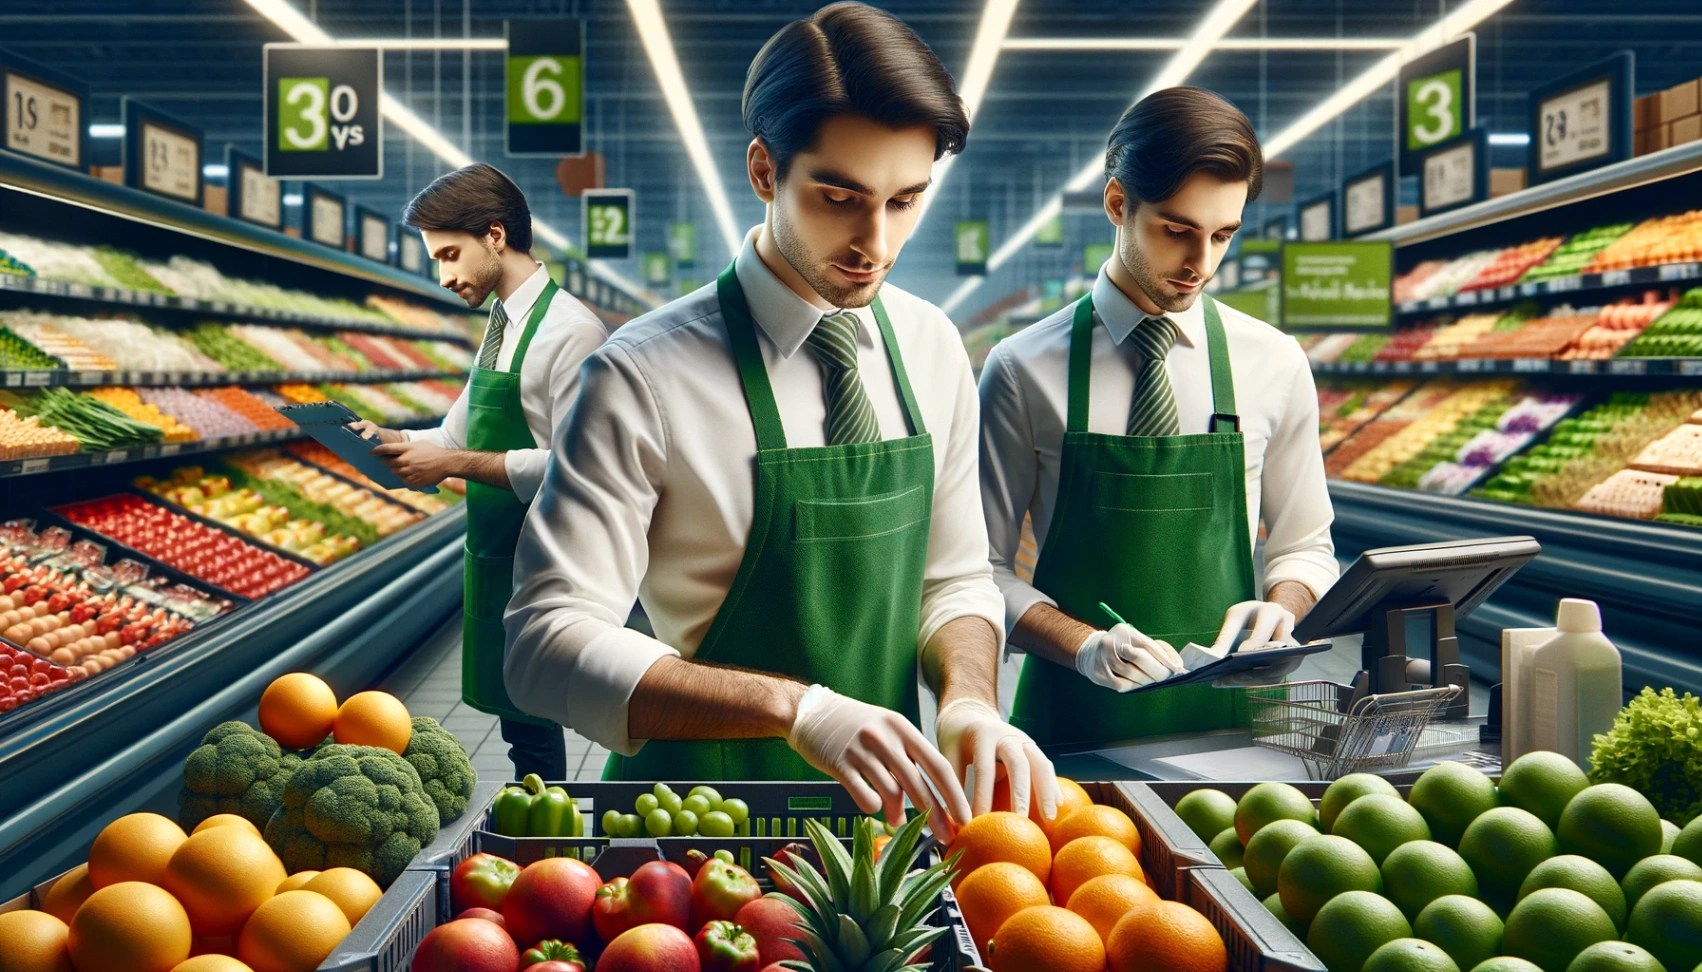 Publix Super Markets Careers: Learn How to Apply Now